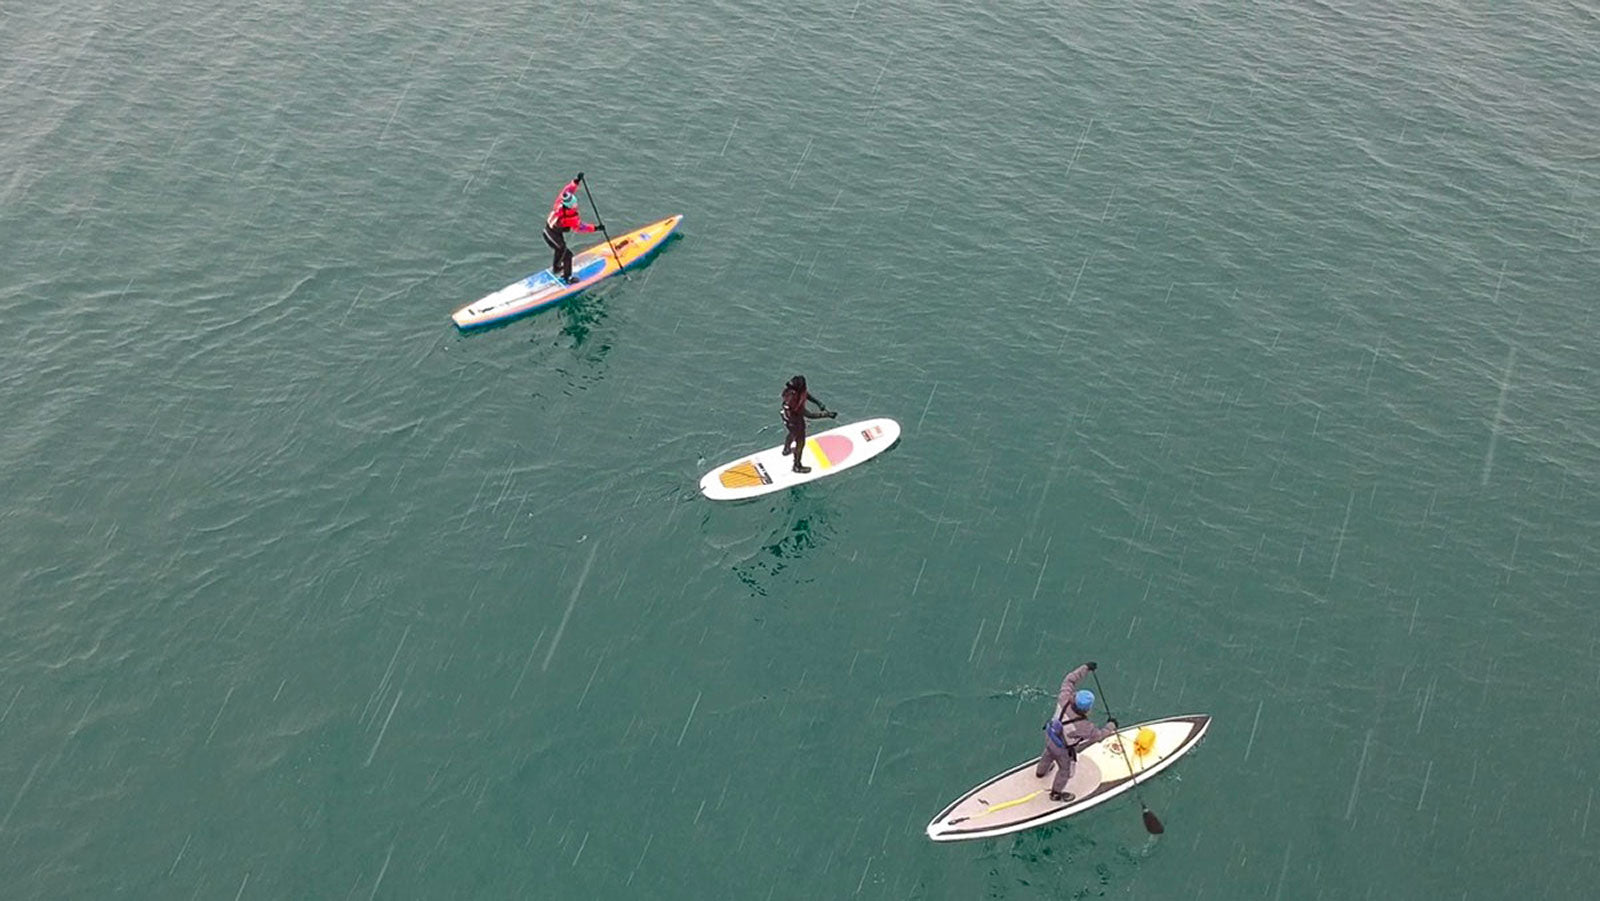 Winter SUP Standup Paddle Boarding Photograph by Matthew Arbied